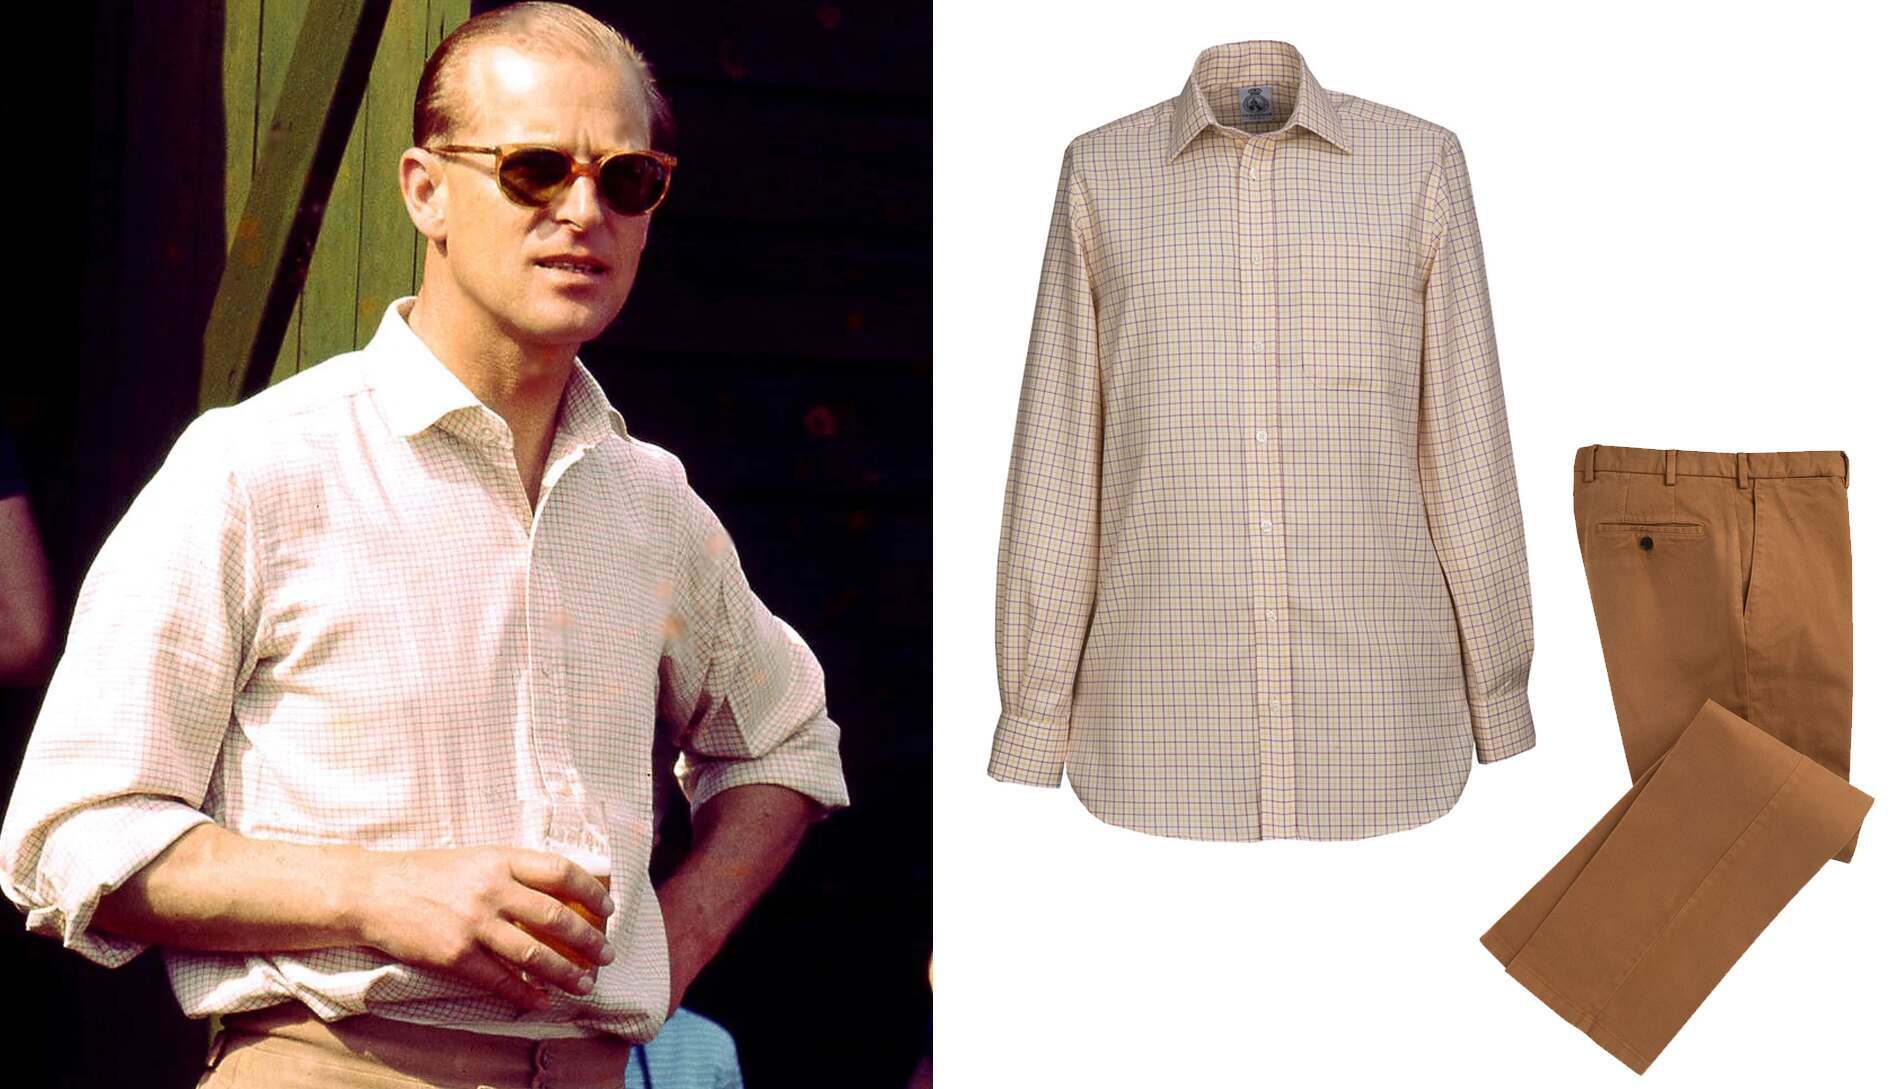 Prince Philip in a Tattersall shirt and sun glasses in 1961 positioned next to an image of a Cordings Tattersall shirt and a pair of Cordings brown chinos.